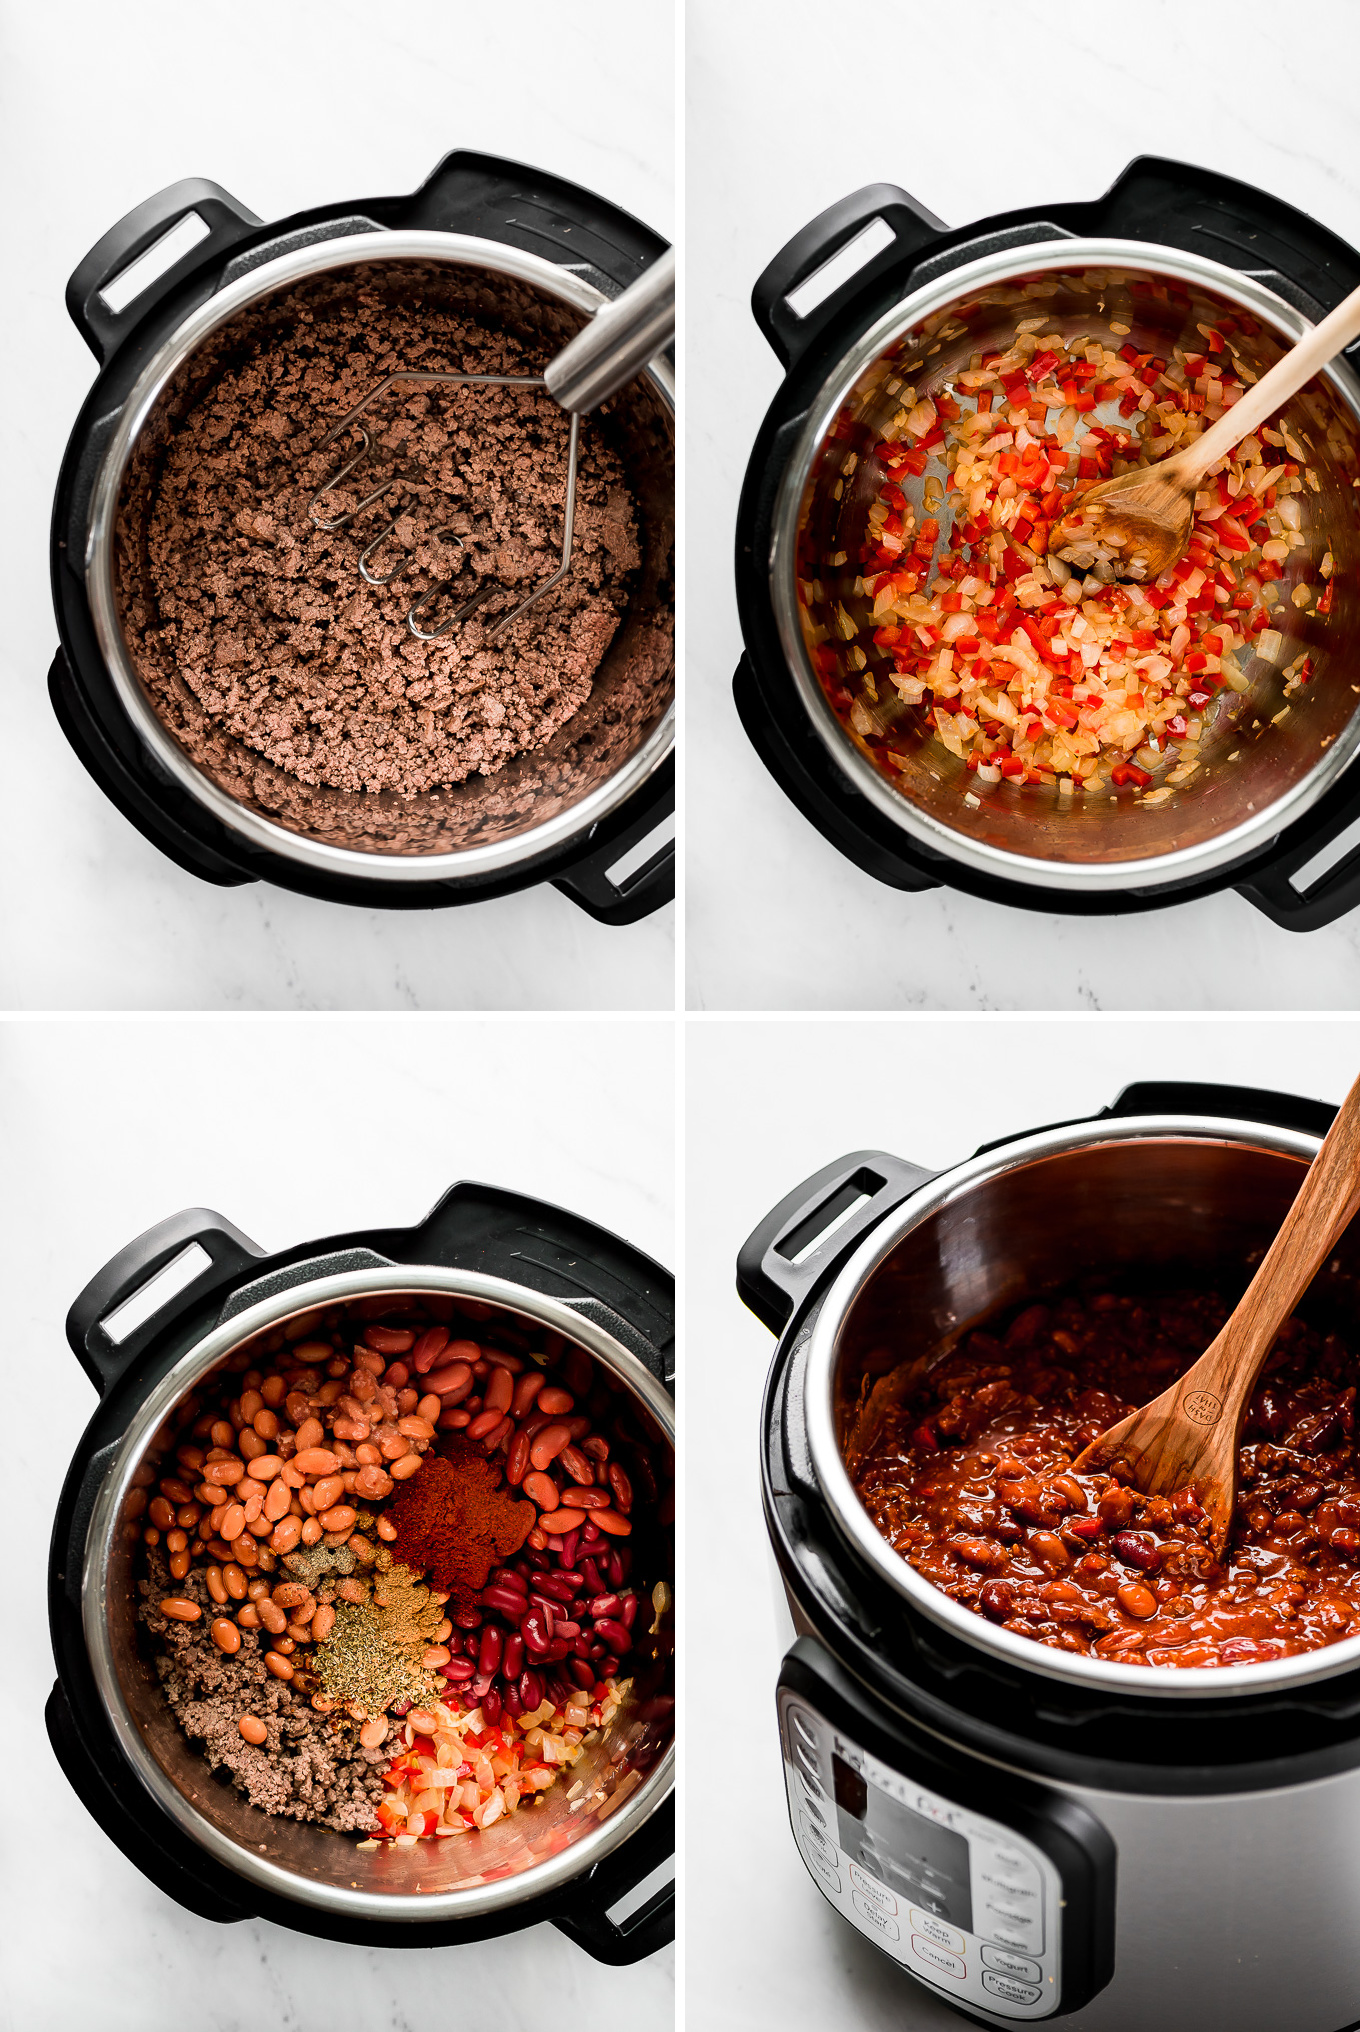 4 images of cooking Chili in an Instant Pot- Browning ground beef, sauteing onions and peppers, all the ingredients in the pot, and the finished pot of chili.